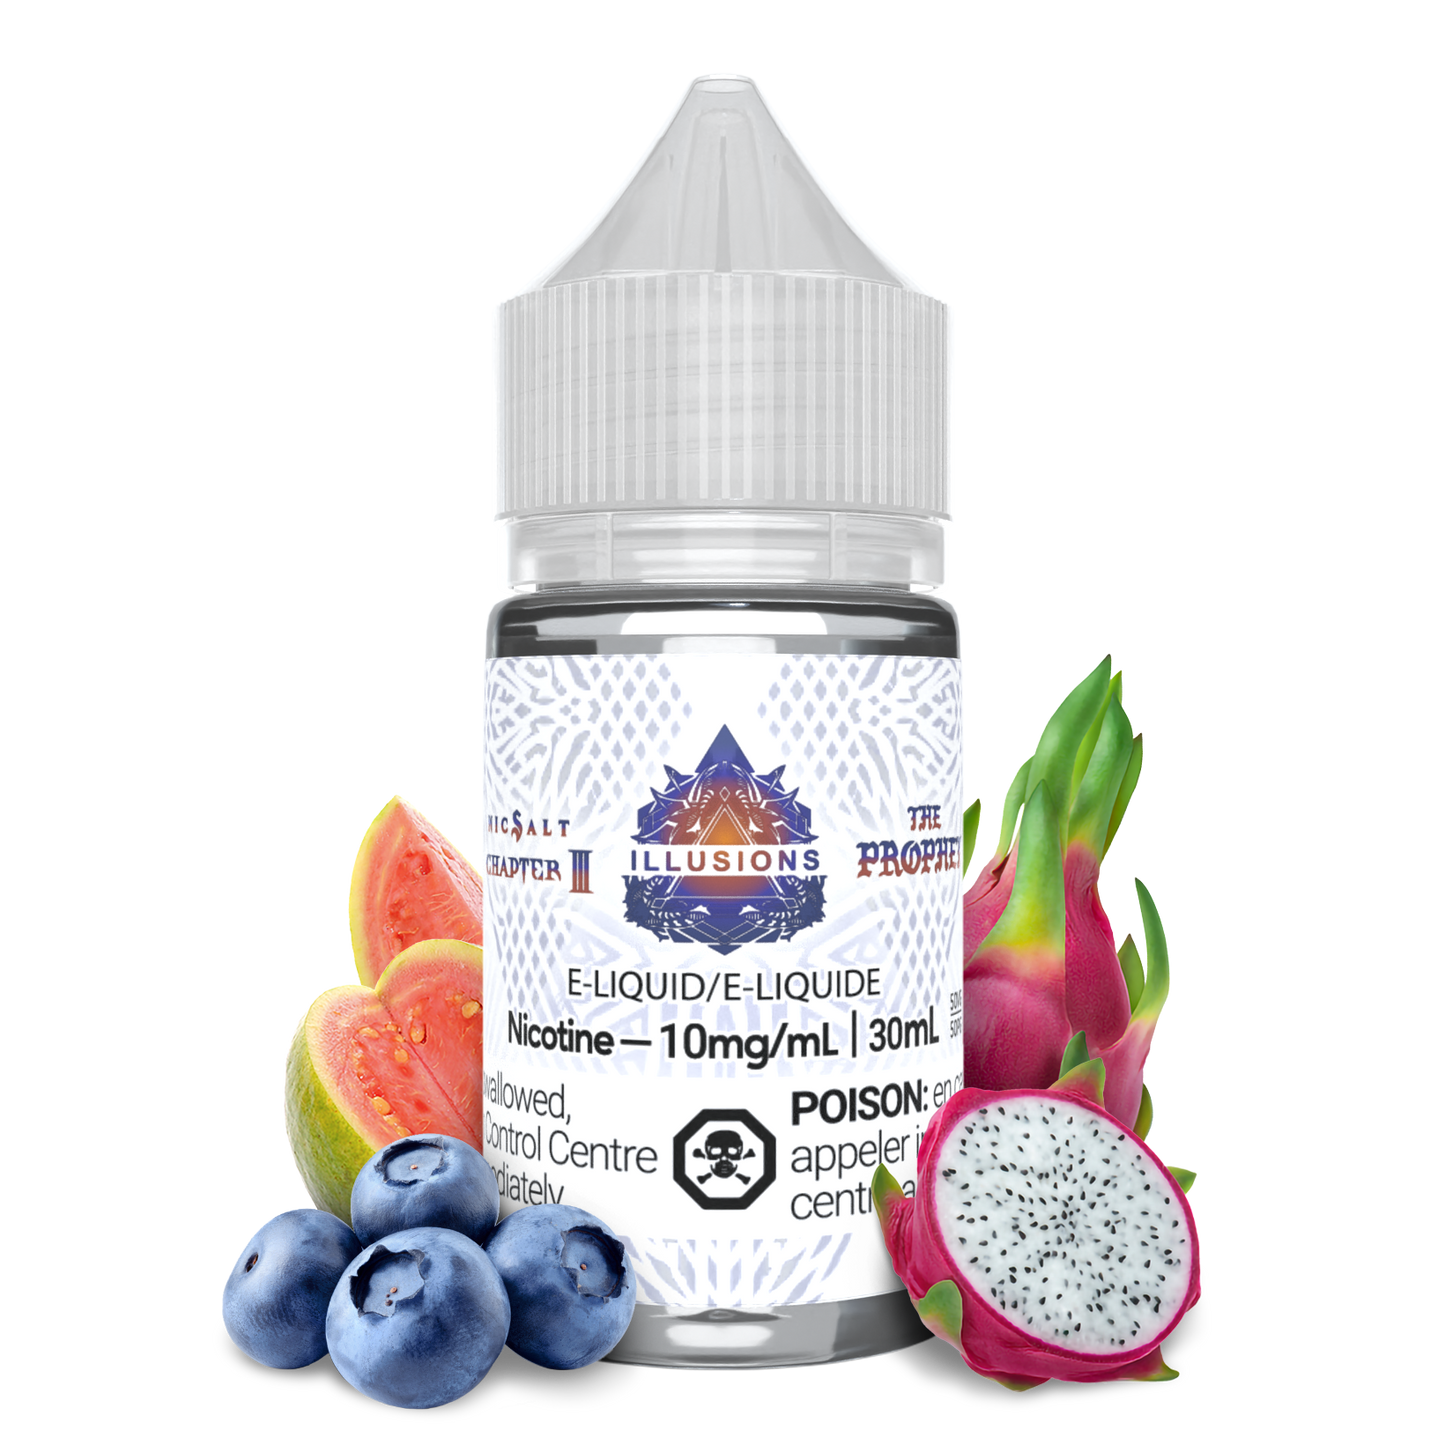 30 mL bottle of The Prophet E-Liquid by Illusions Vapor which is a freebase vape juice that comes in different nicotine strength, the prophet is a fruity mix of guava, dragonfruit, and blueberries